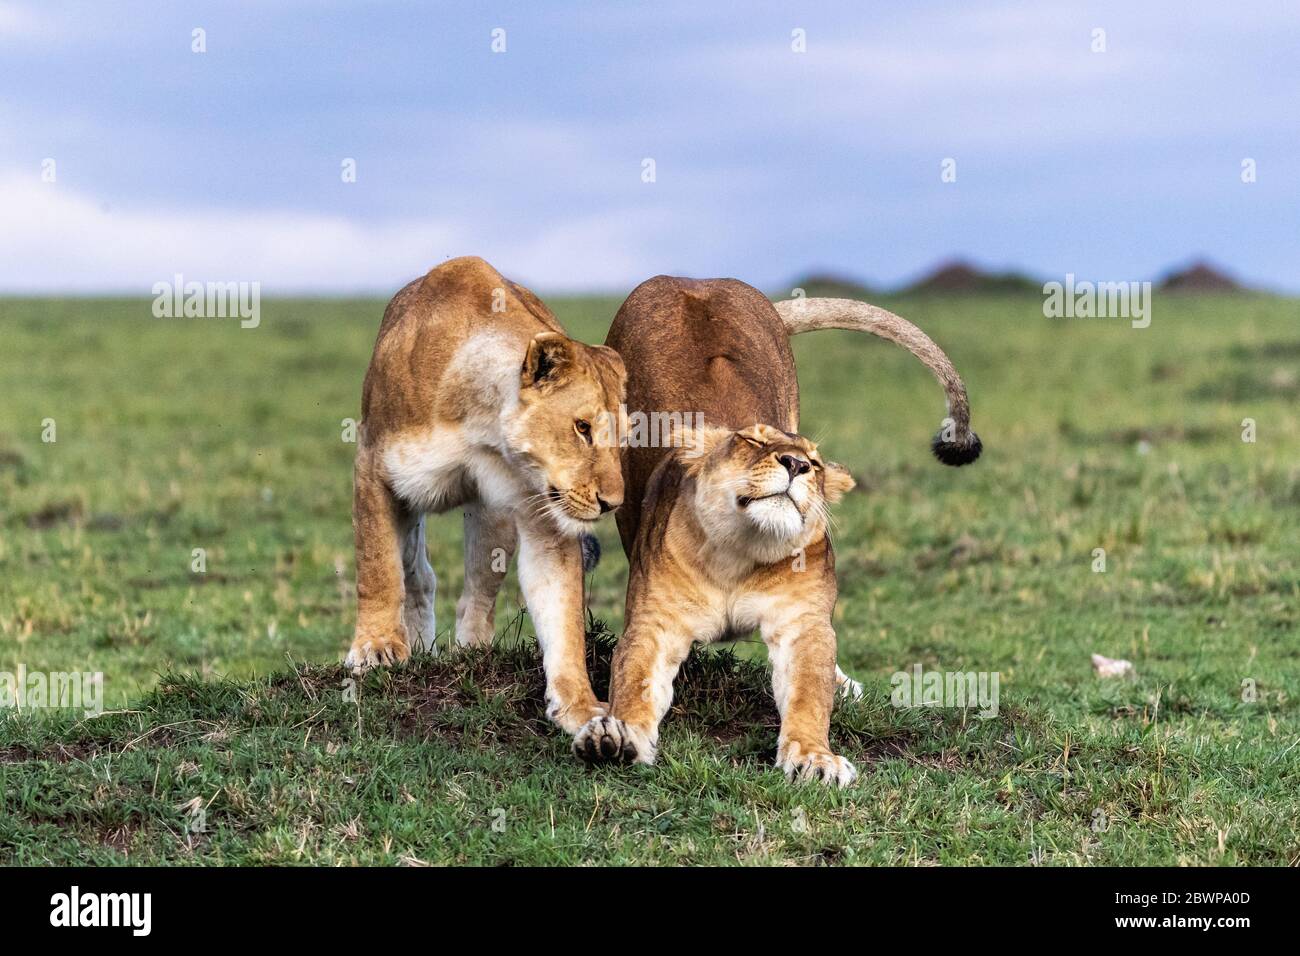 Two African lioness together snuggling and stretching in the Mara Triangle Conservancy Triangle, Kenya Africa Stock Photo